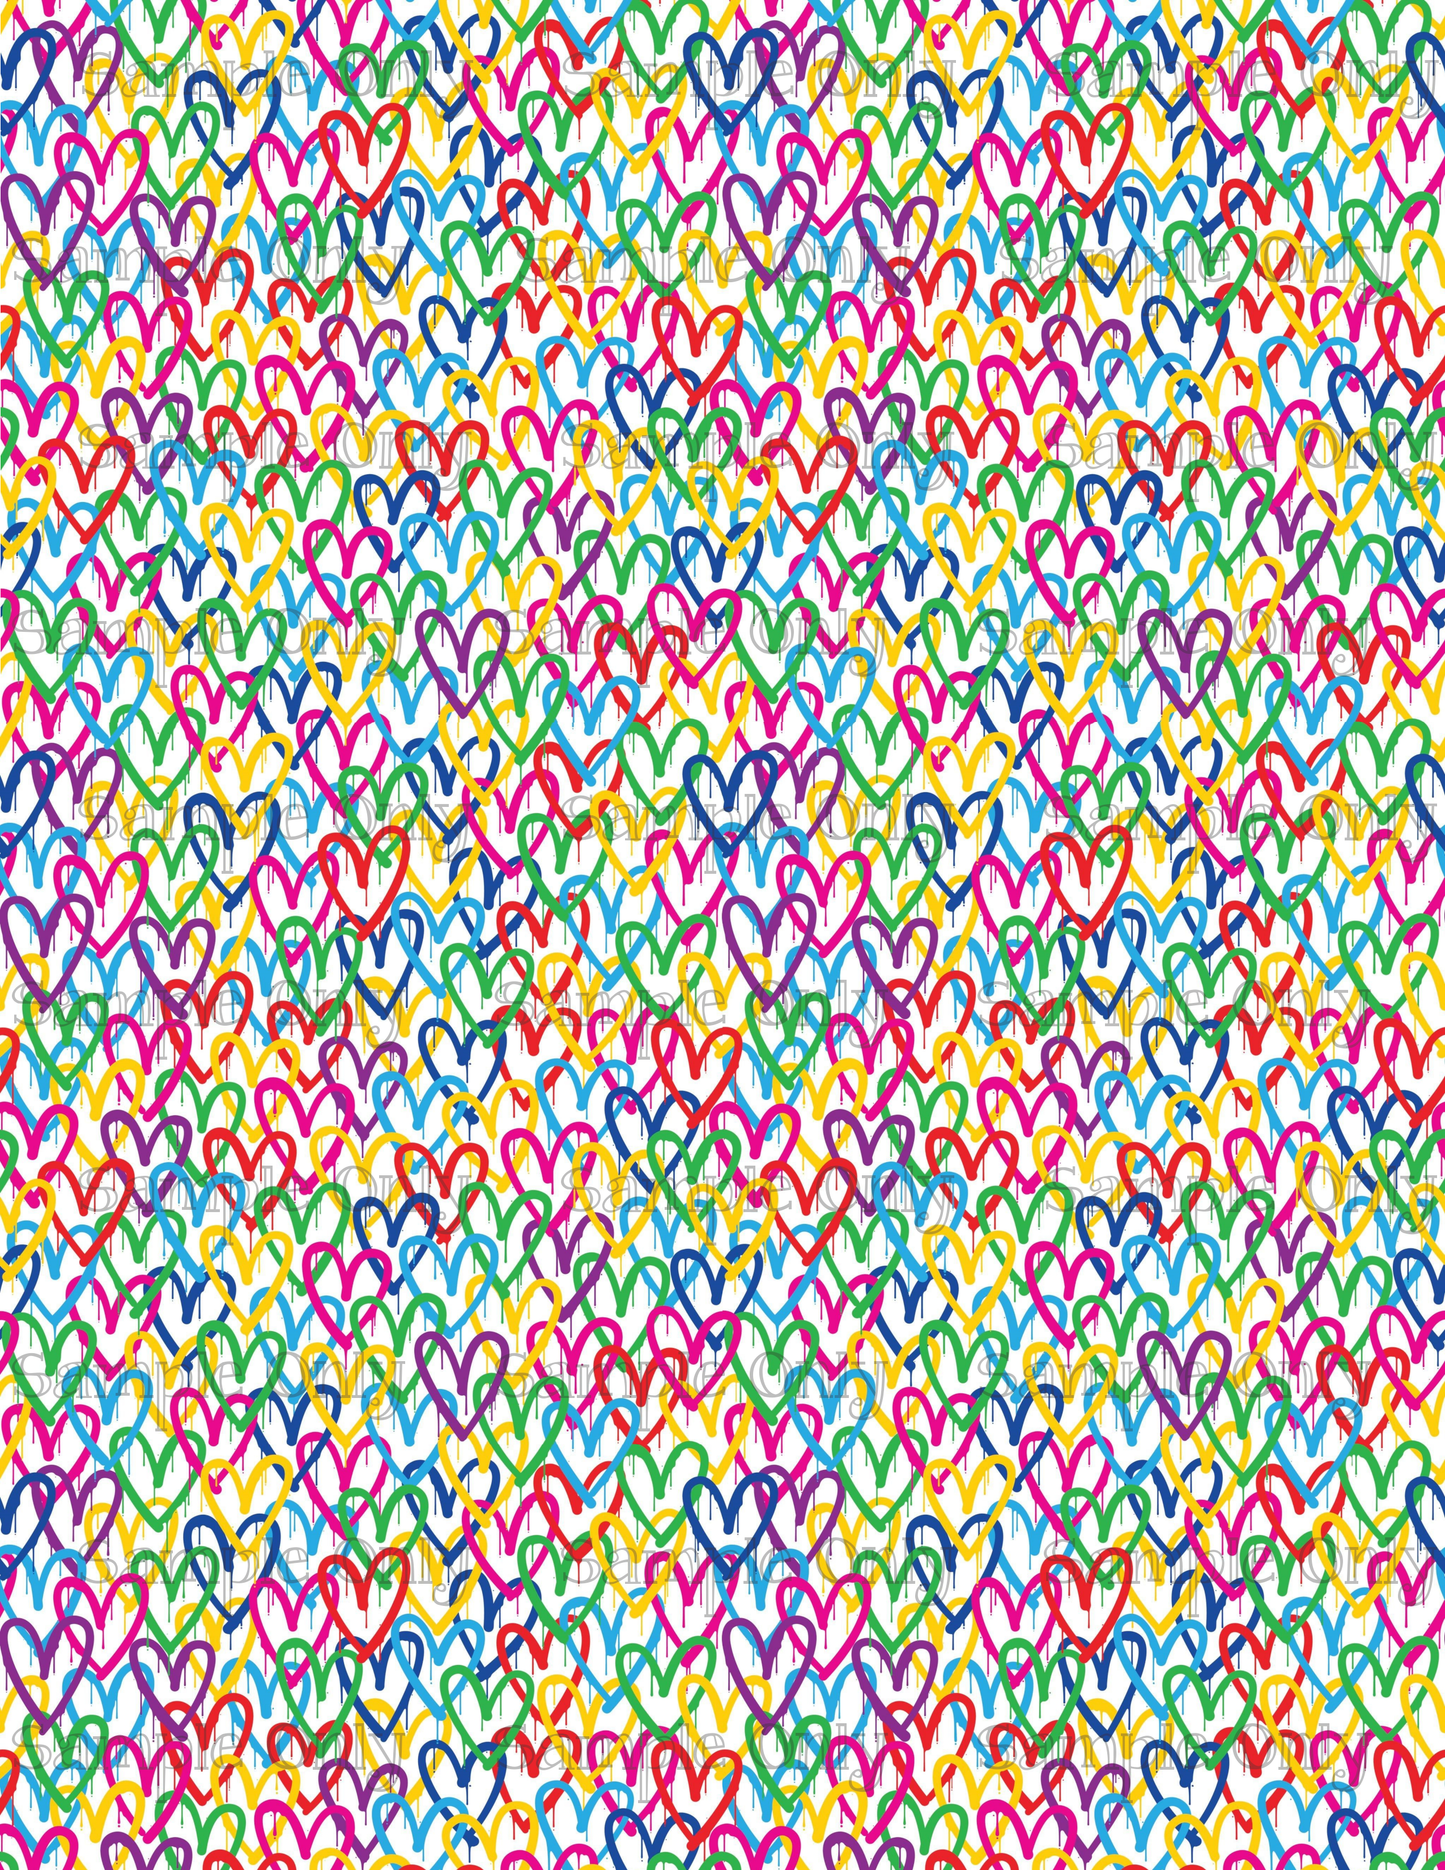 Drippy Rainbow Hearts Pattern Image Sheet For Polymer Clay Transfer Decal DIGITAL FILE OR PRINTED